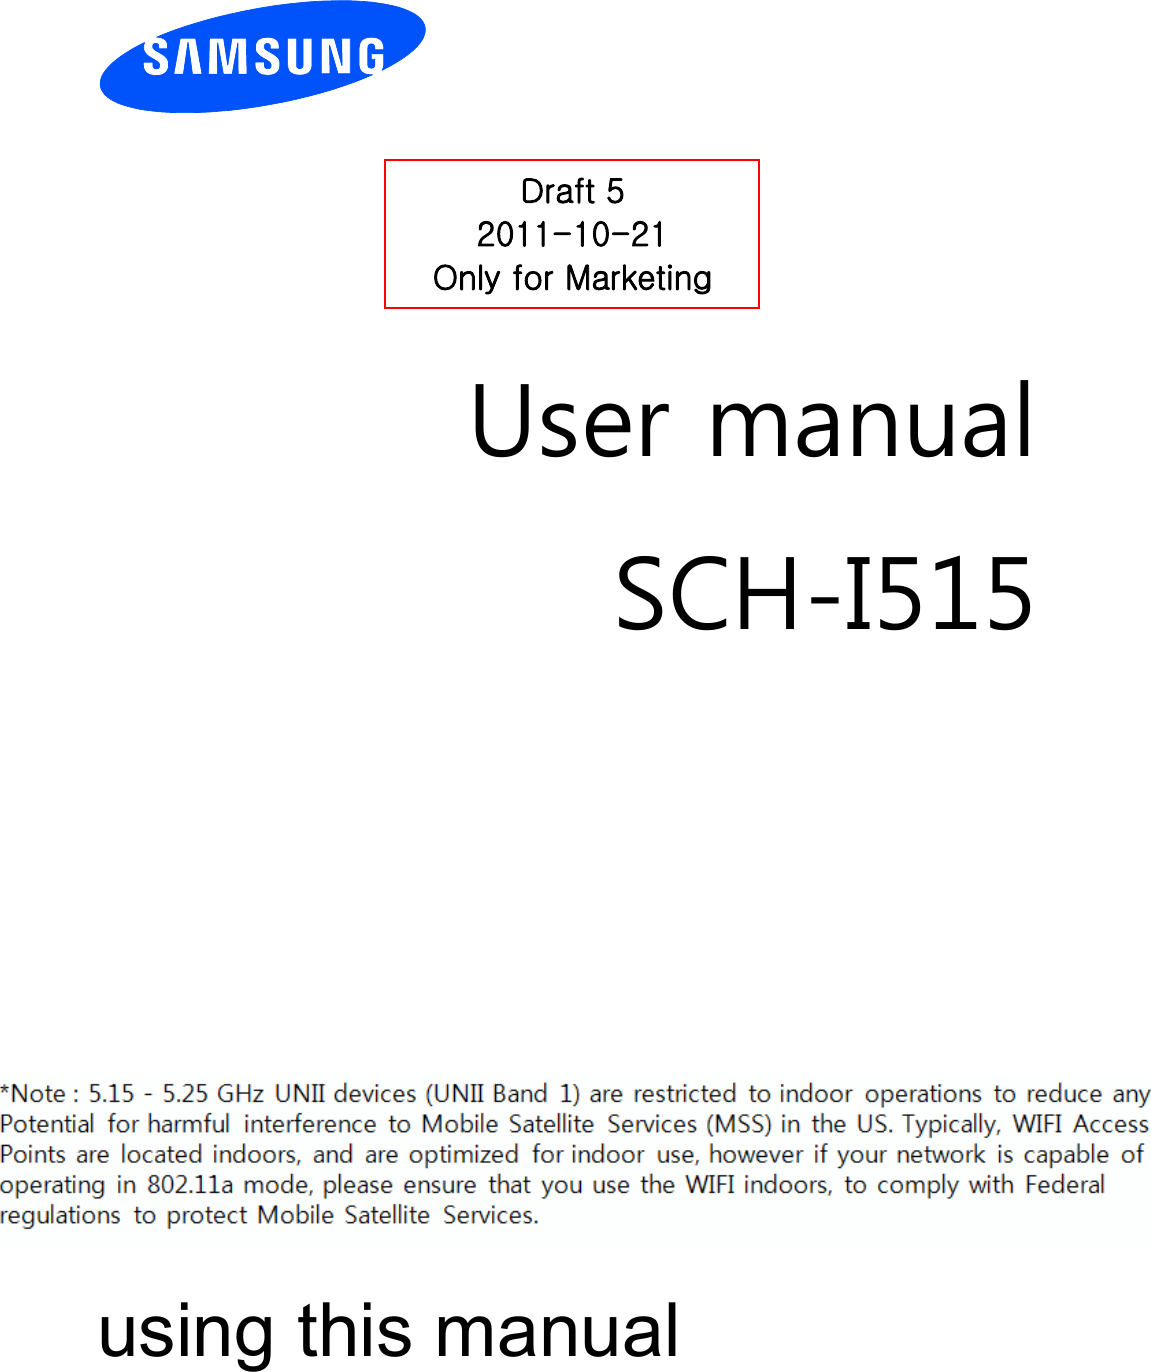         User manual SCH-I515                  using this manual Draft 5 2011-10-21 Only for Marketing 